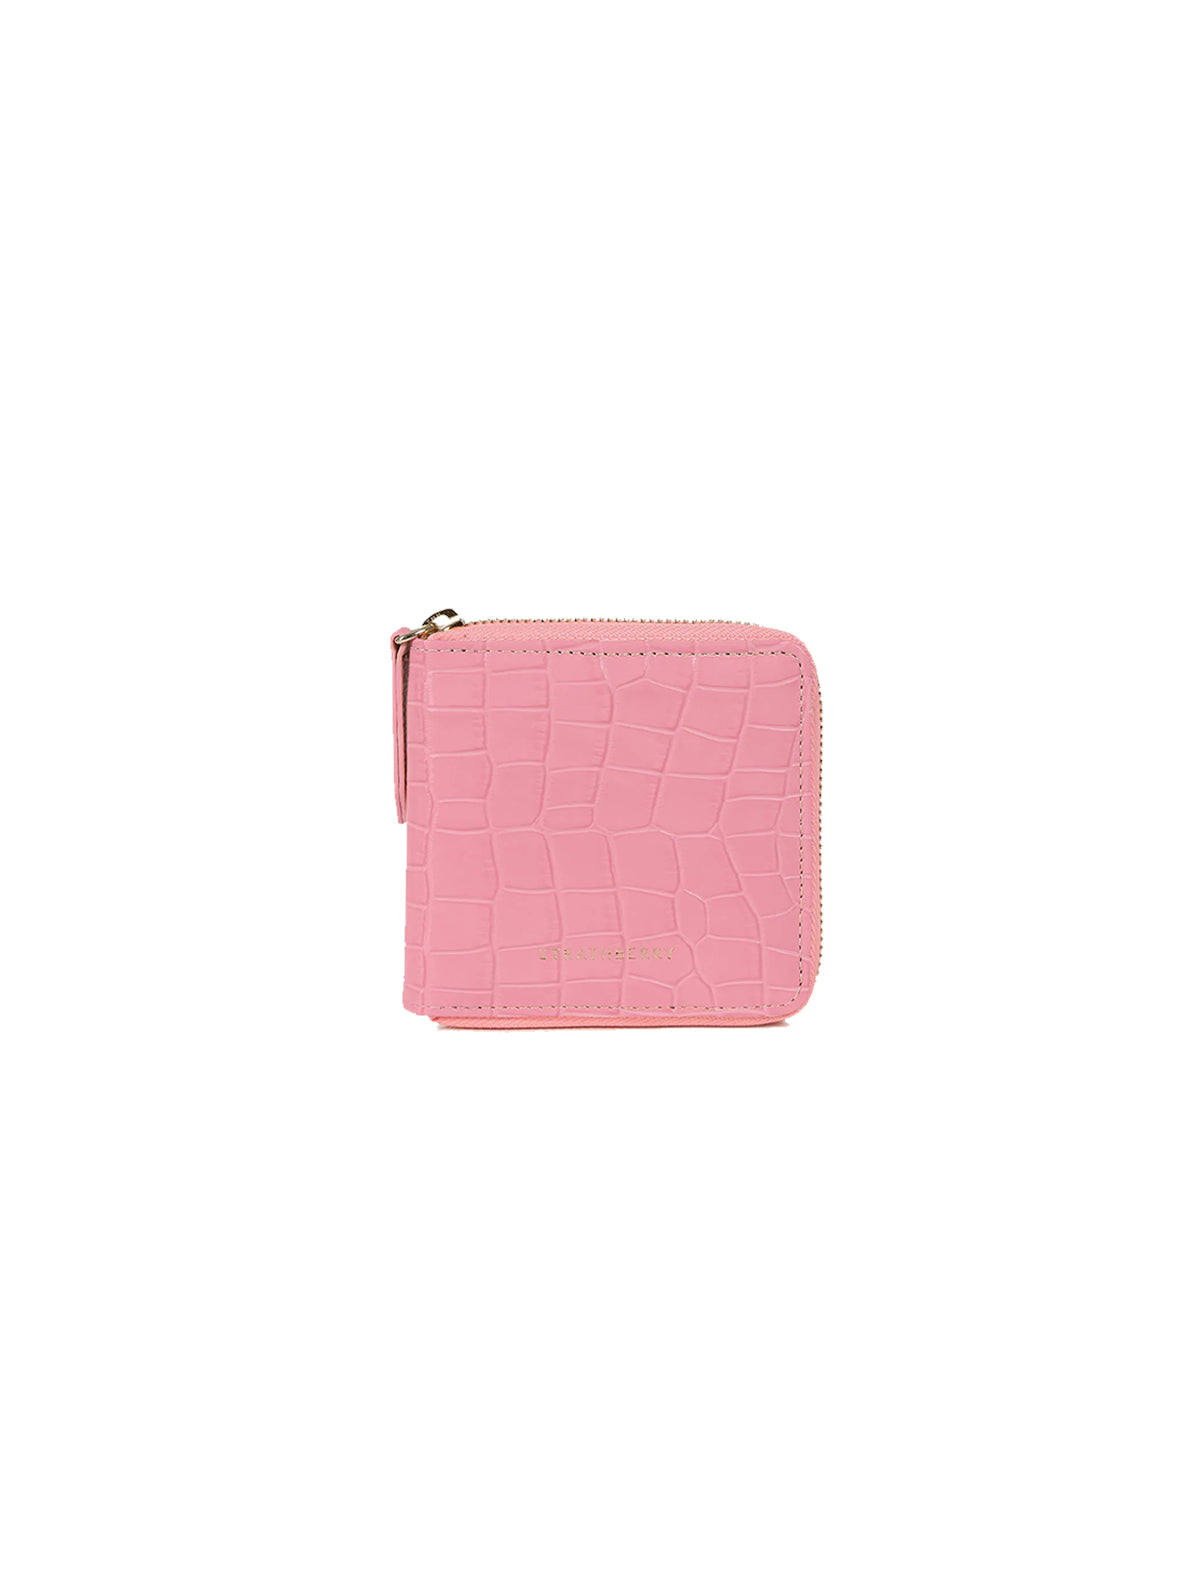 STRATHBERRY Rose Street Wallet Embossed Croc Leather in Caledonian Pink